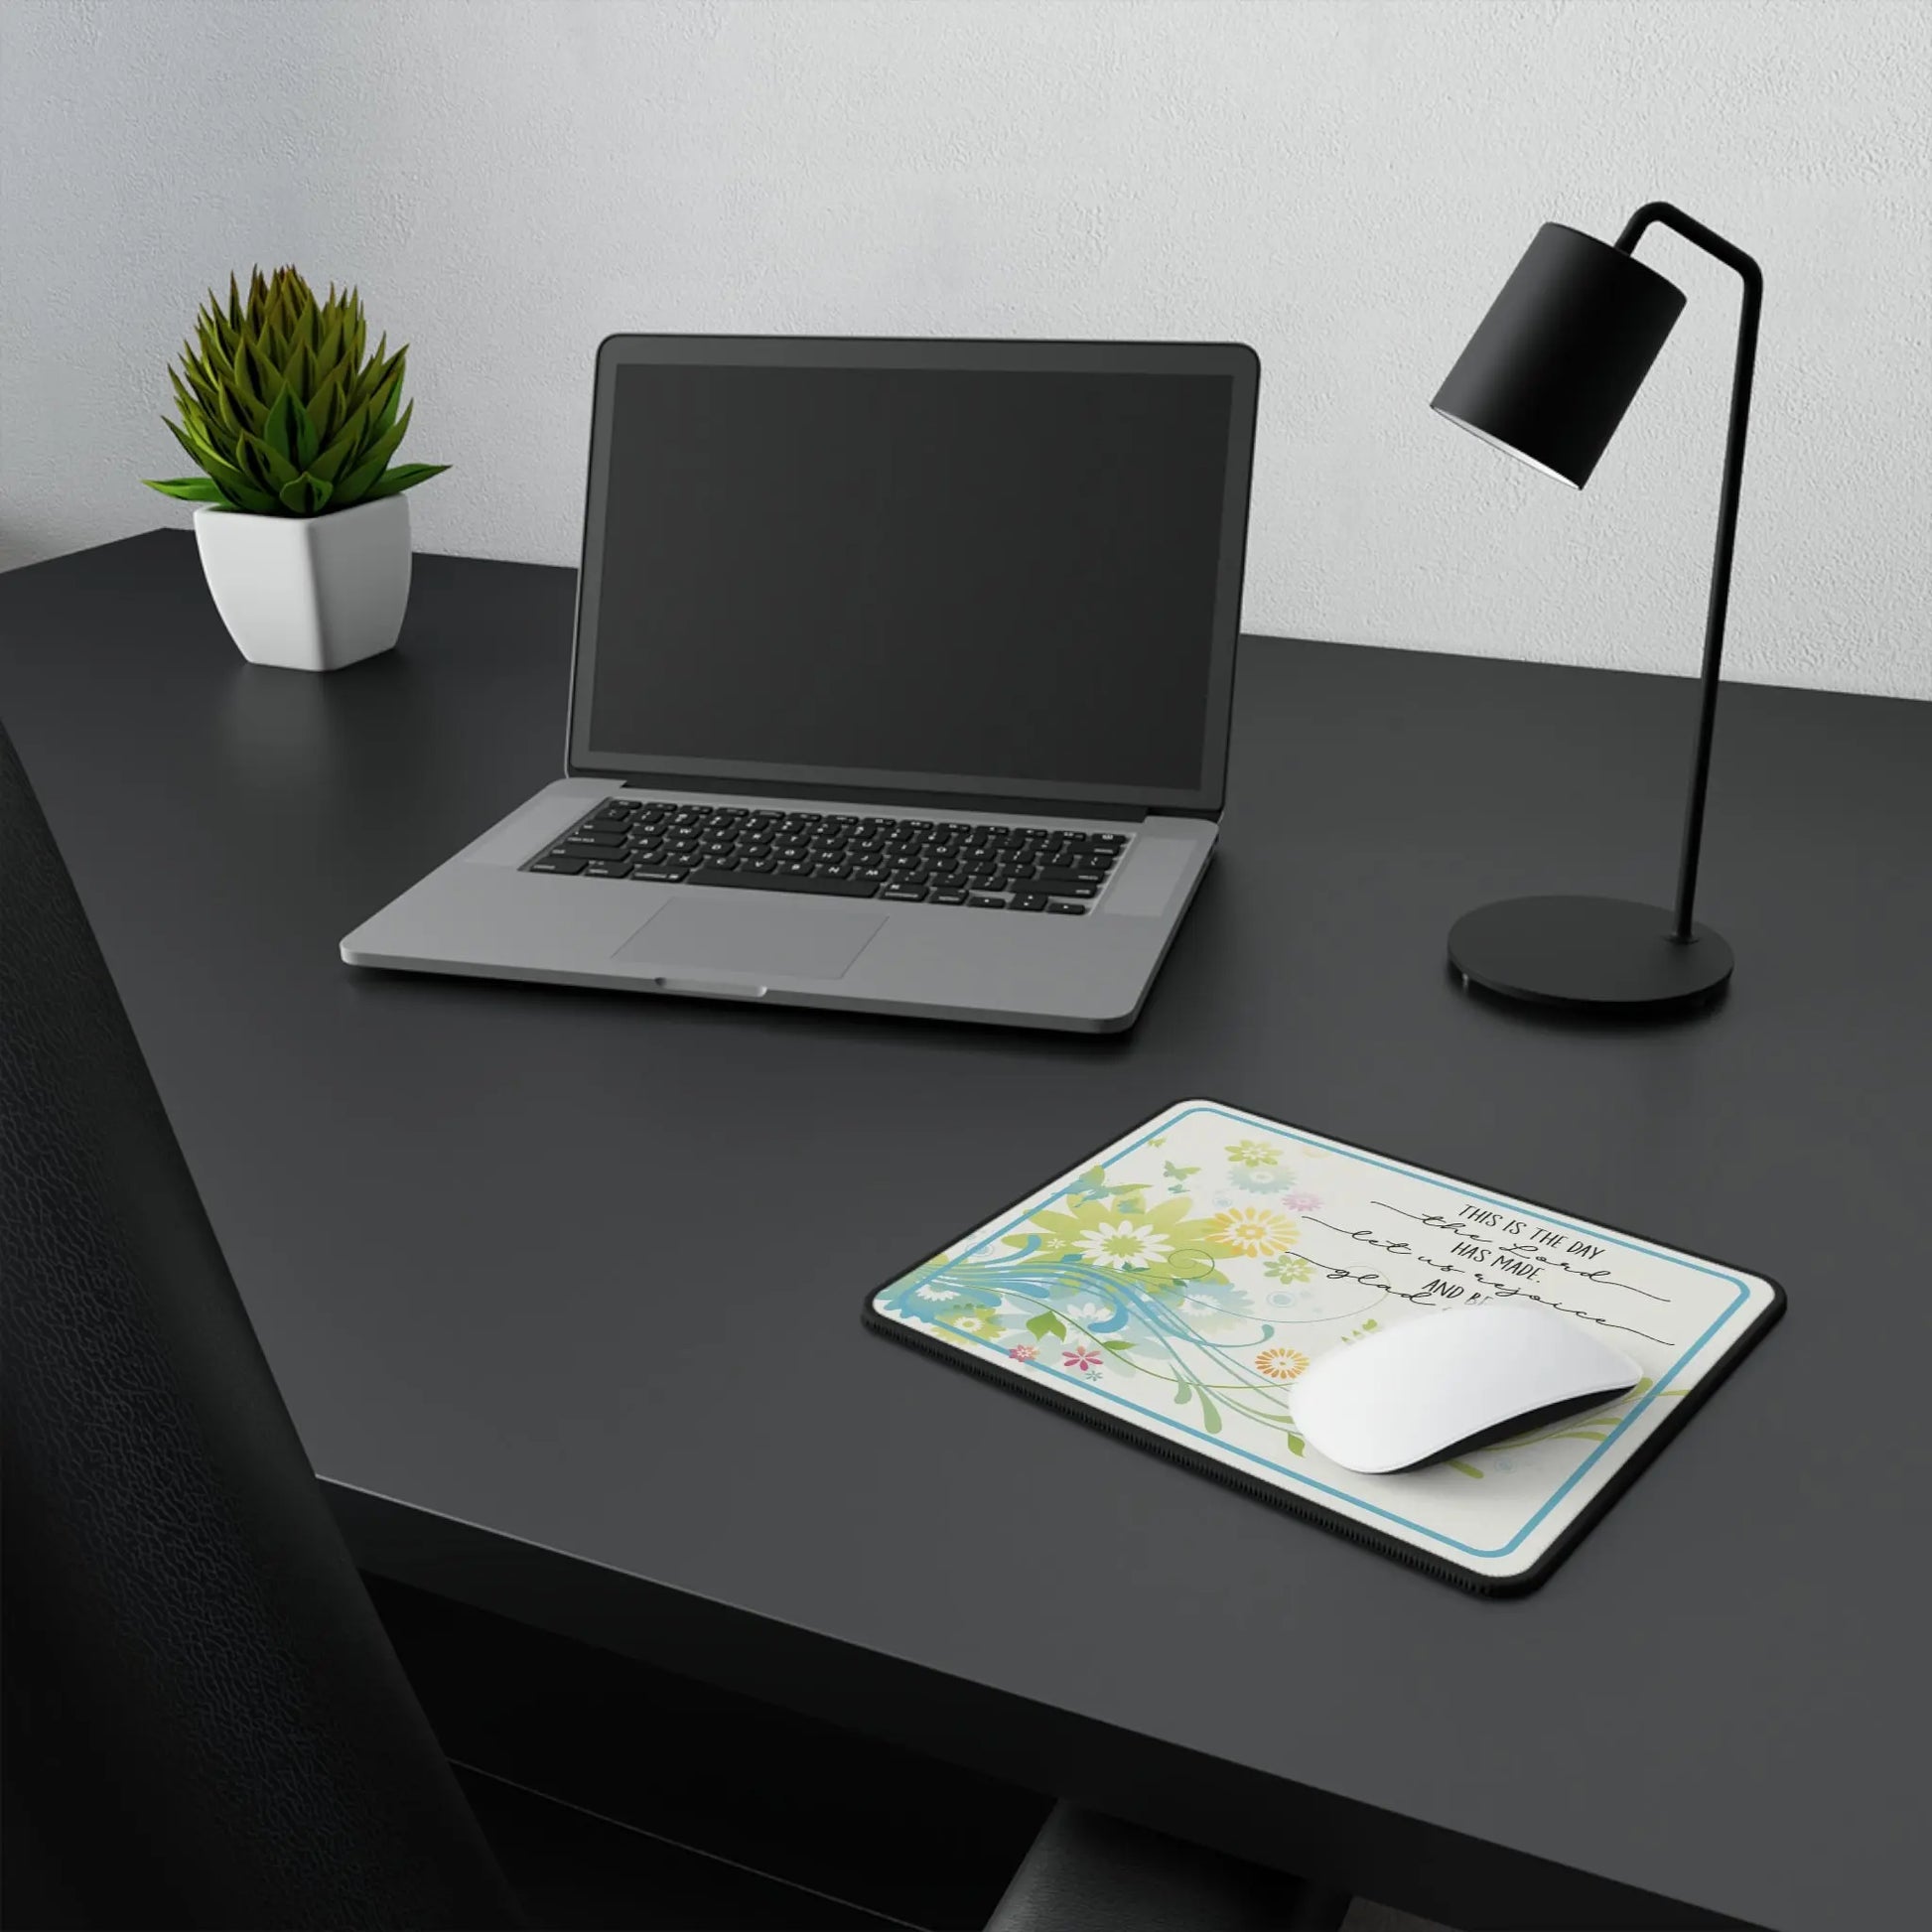 This is the Day Christian Non-Slip Mouse Pad Printify